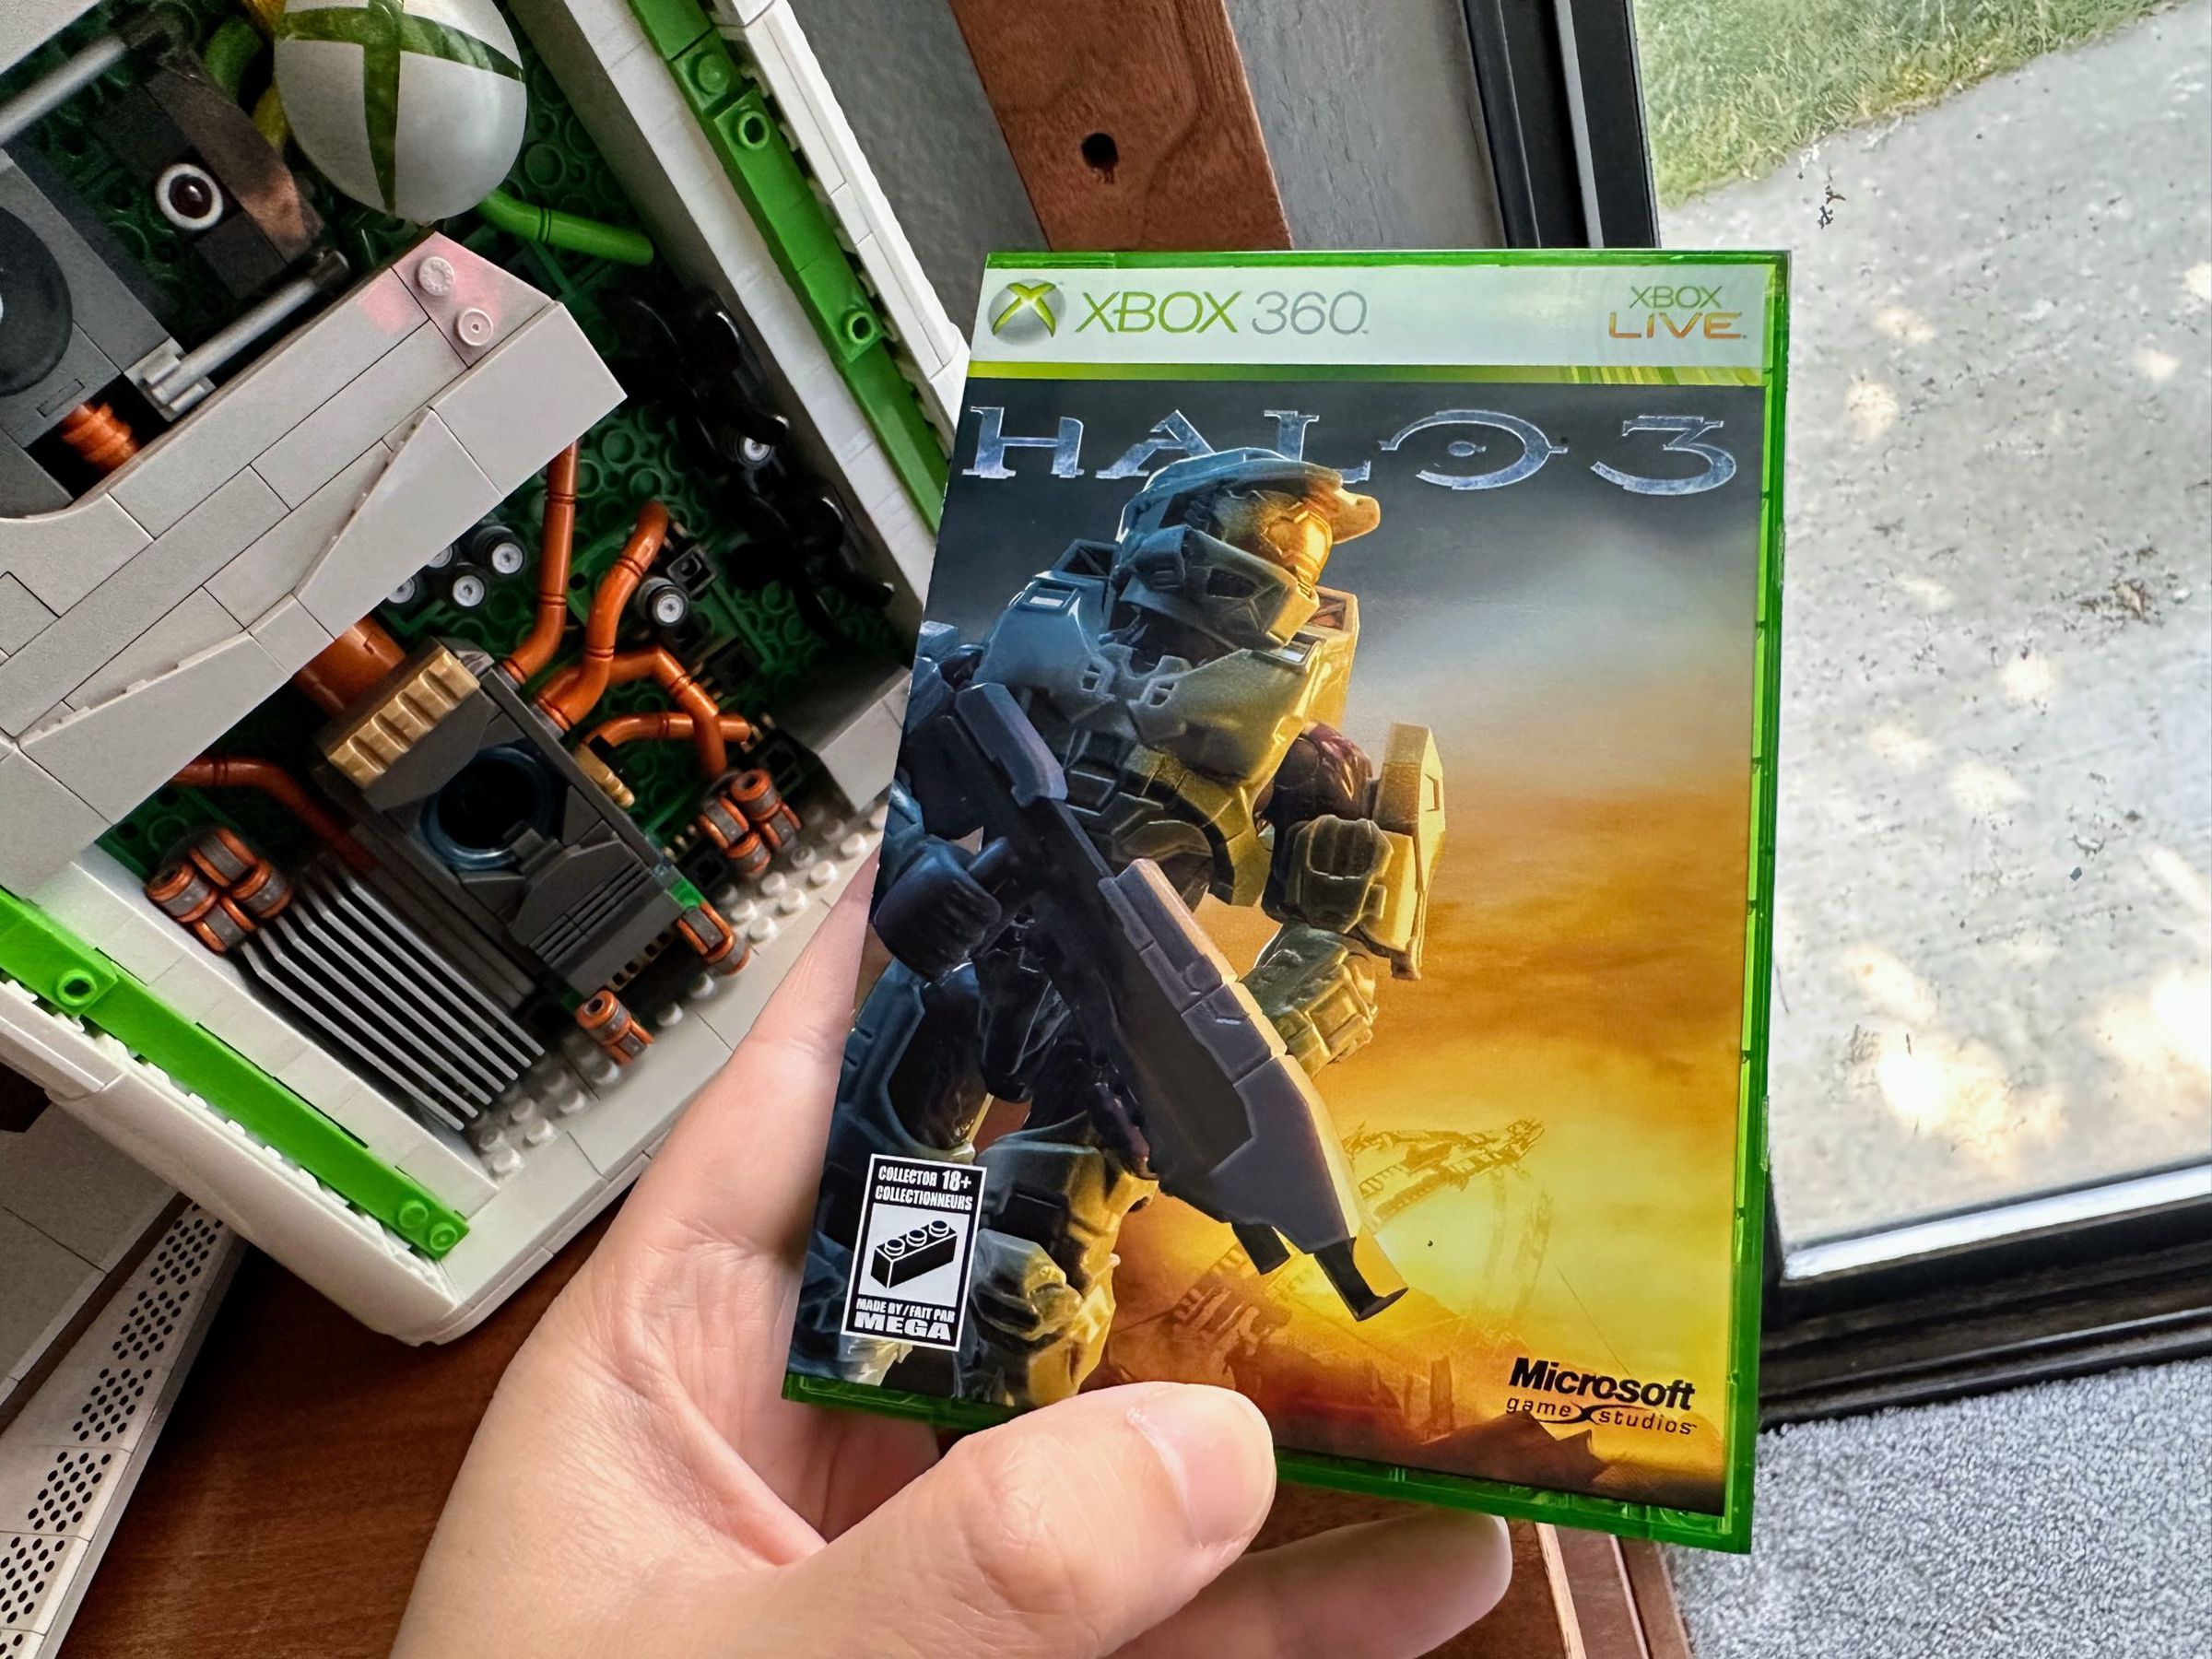 The bright, translucent case for <em>Halo 3</em> even comes with printed cover art, which is a nice extra touch.